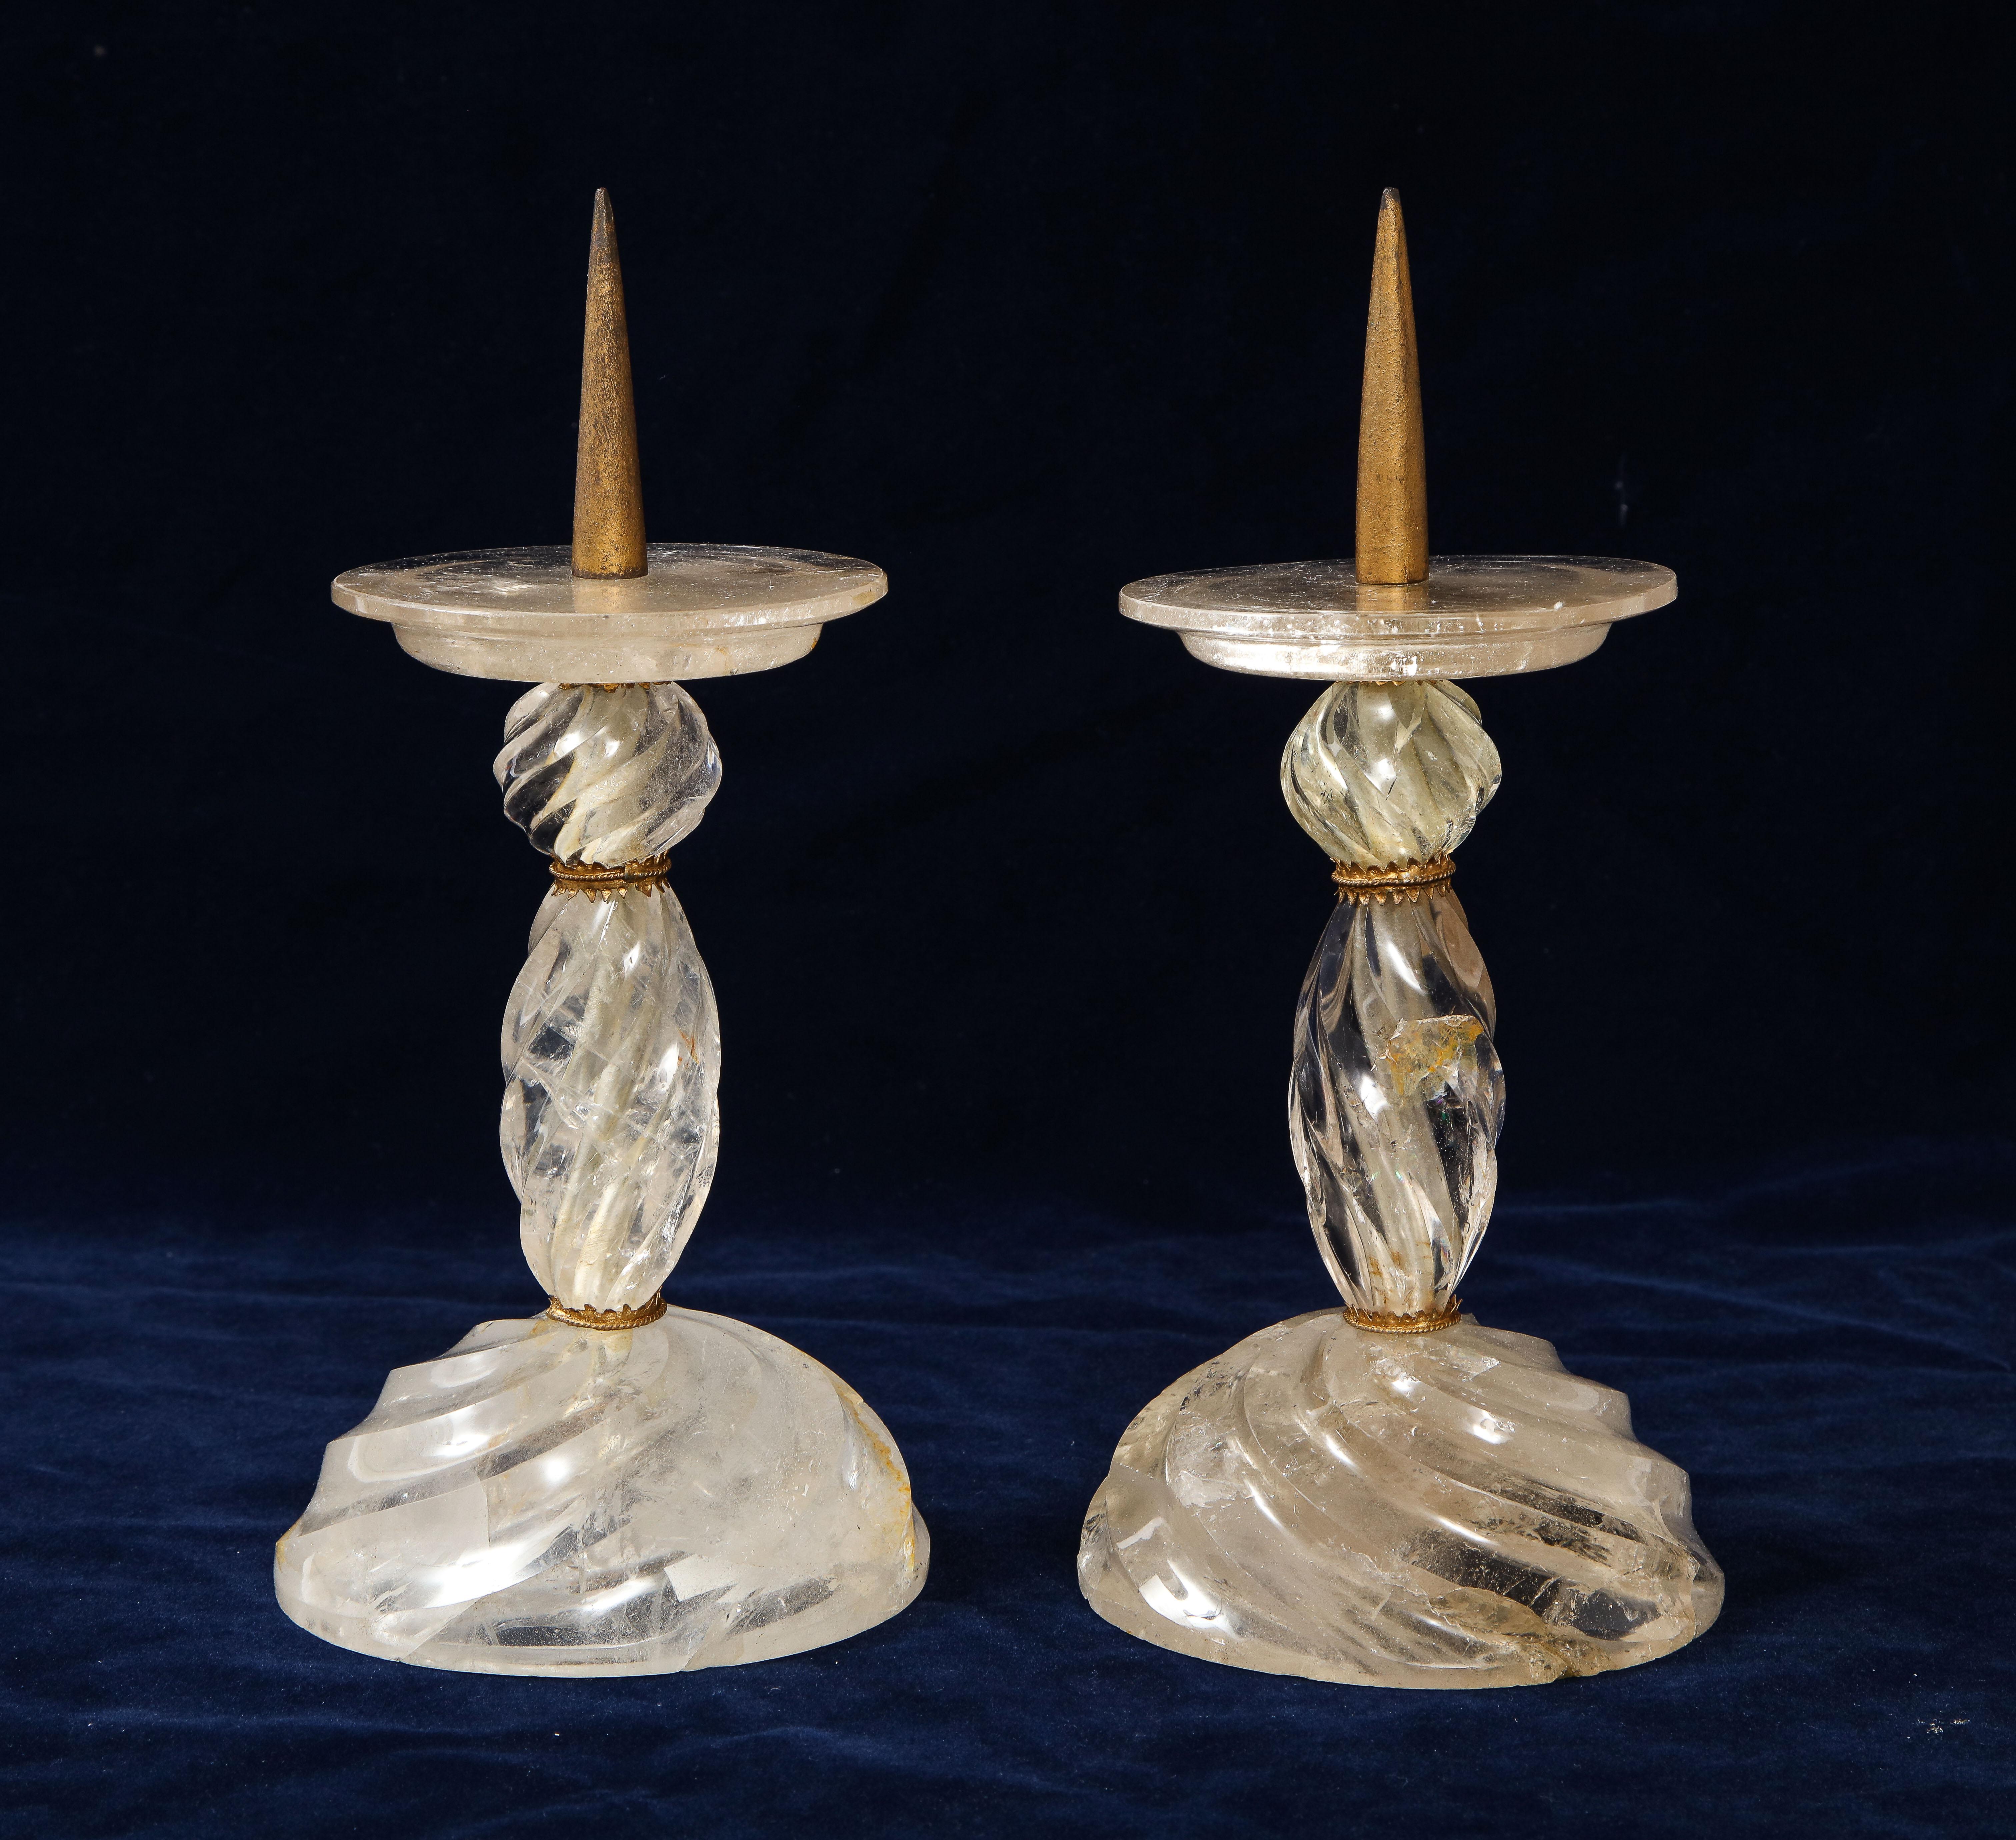 A Fabulous pair of French Louis XVI style dore bronze mounted hand carved rock crystal swirling spiked candlesticks, attributed to Baguès. Each candlestick is exceptionally hand carved and mounted on a beautiful dore bronze mount. Protruding from